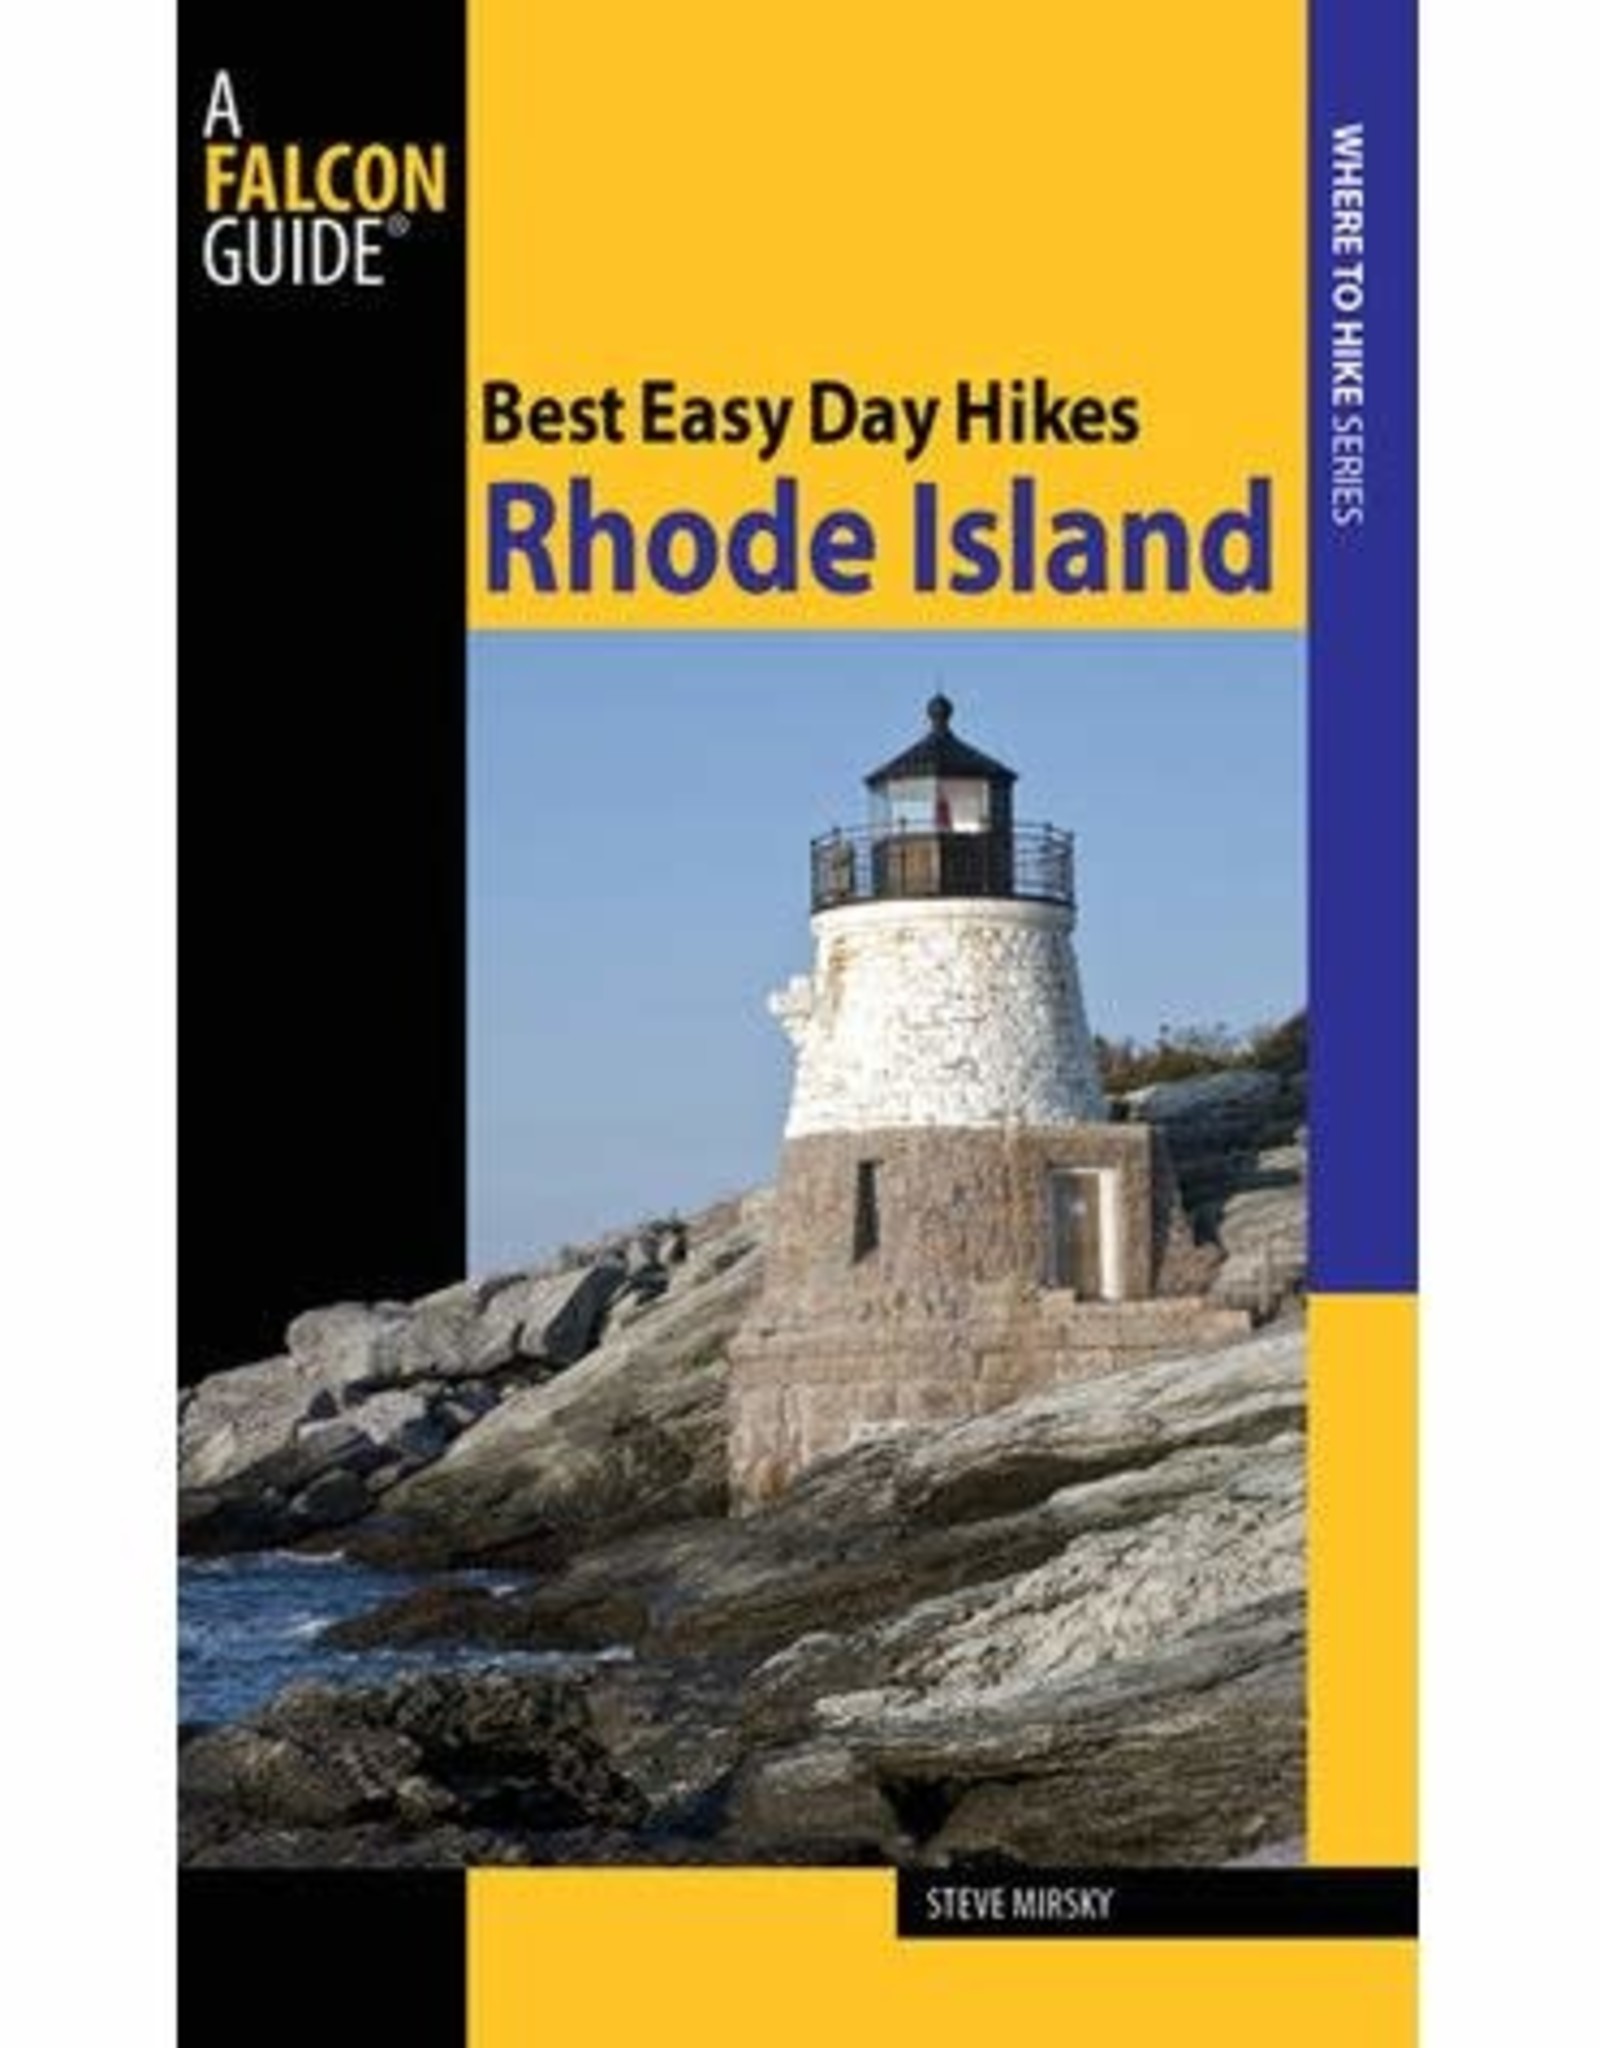 Best Easy Day Hikes in Rhode Island